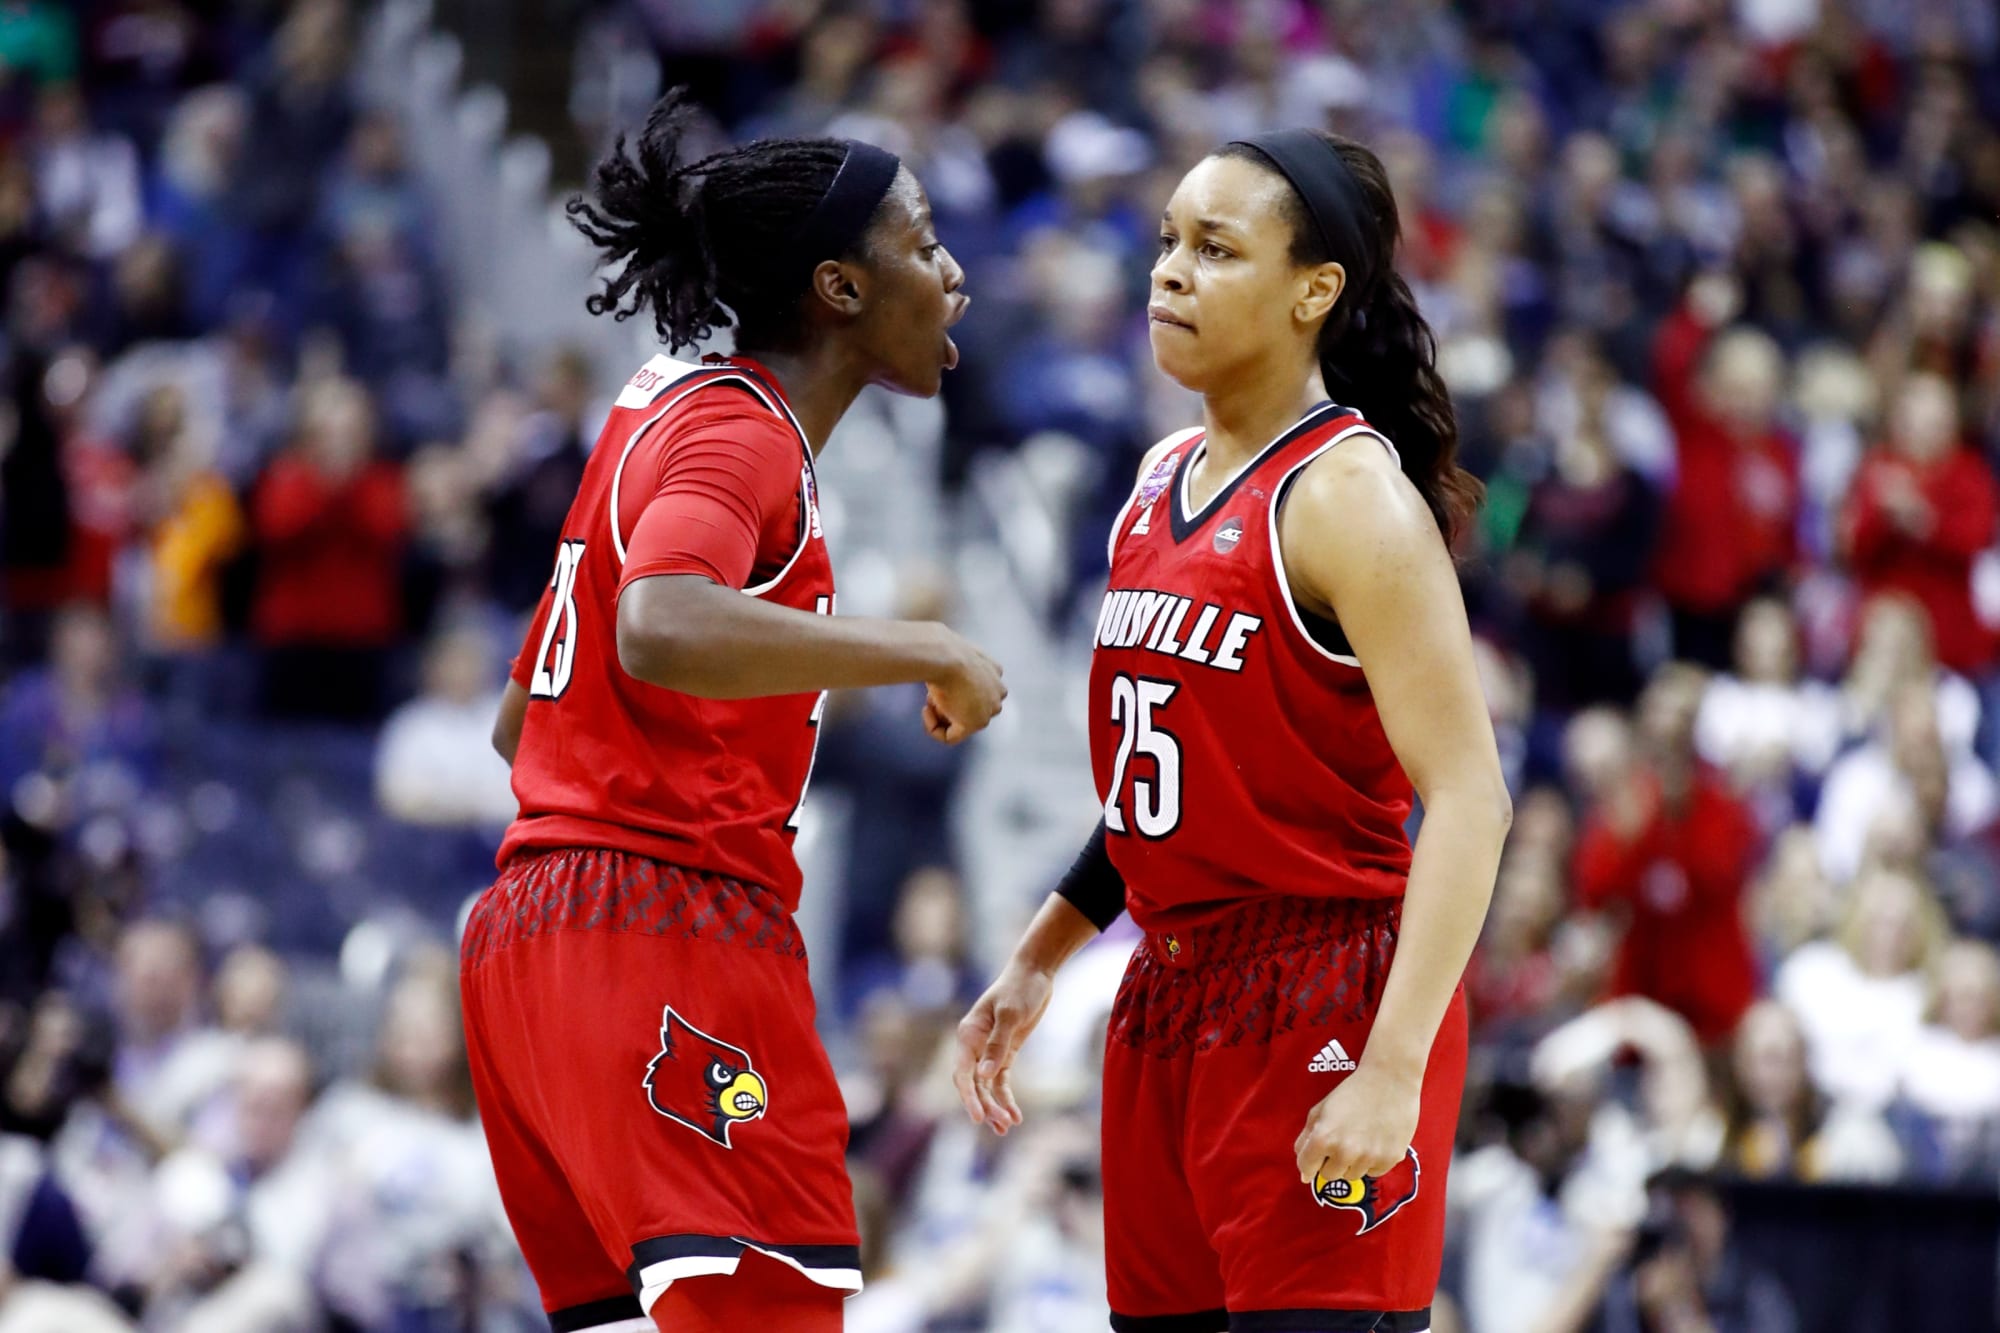 Louisville women's basketball will make it all the way, here’s why